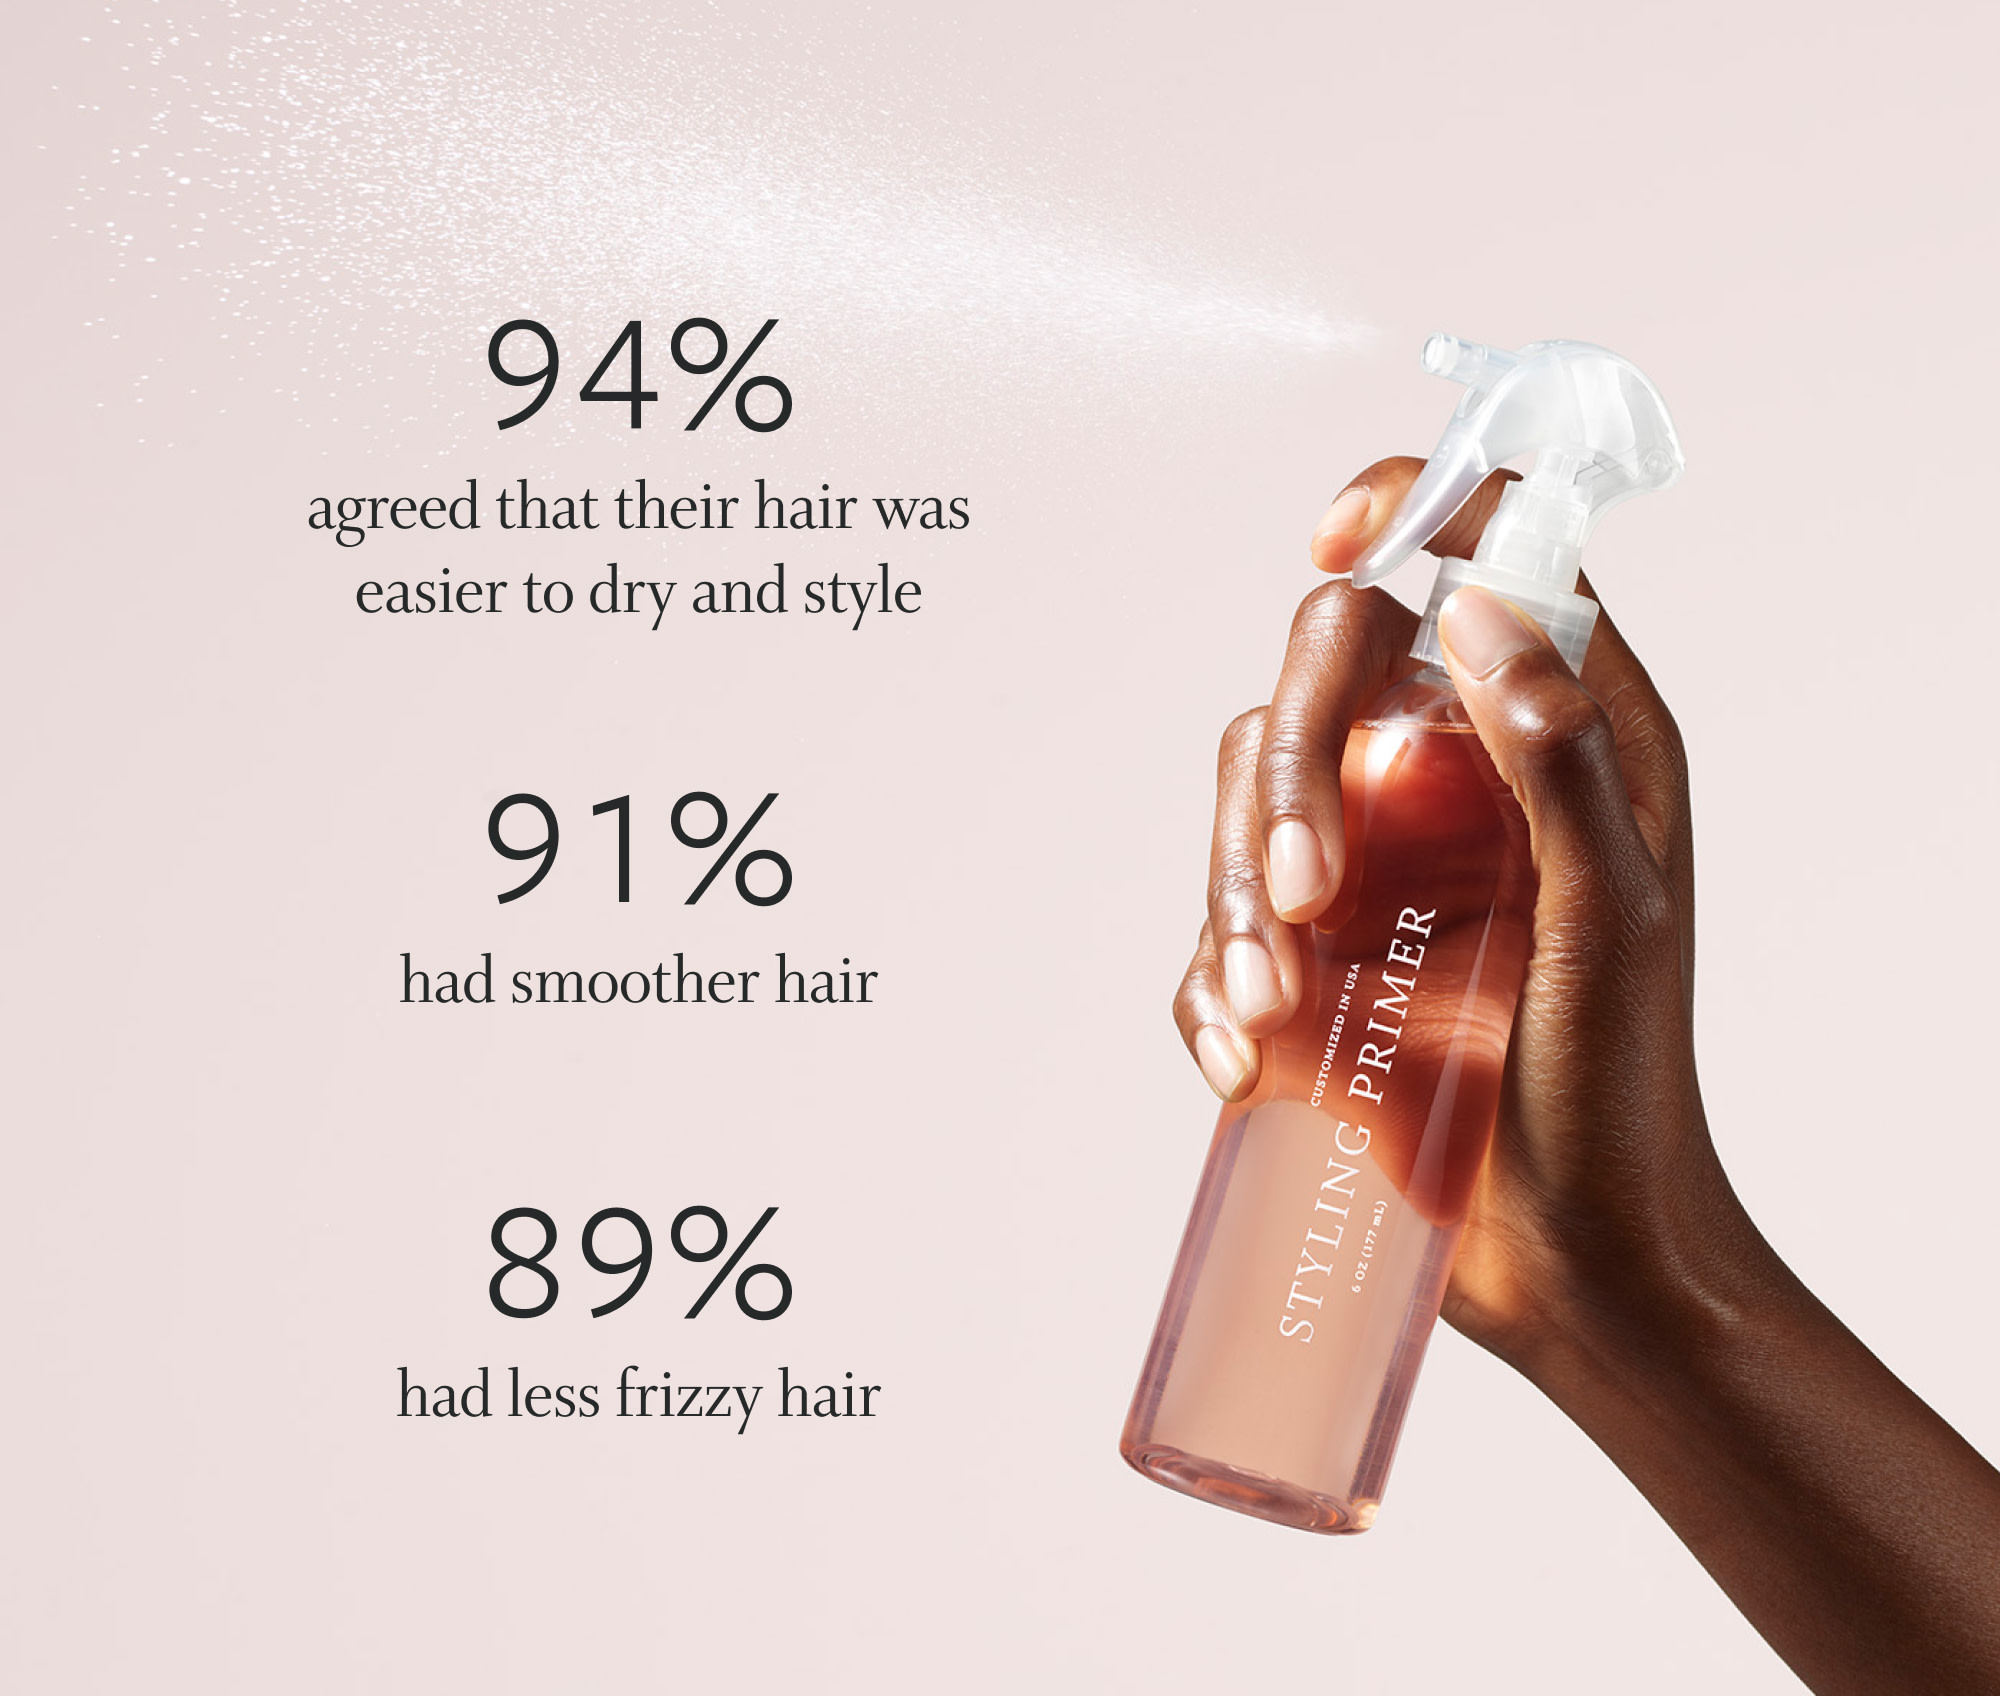 Styling primer mid spray with product claims. 95% of customers had softer hair. 91% of customers had smoother hair. 89% of customers had less frizzy hair.